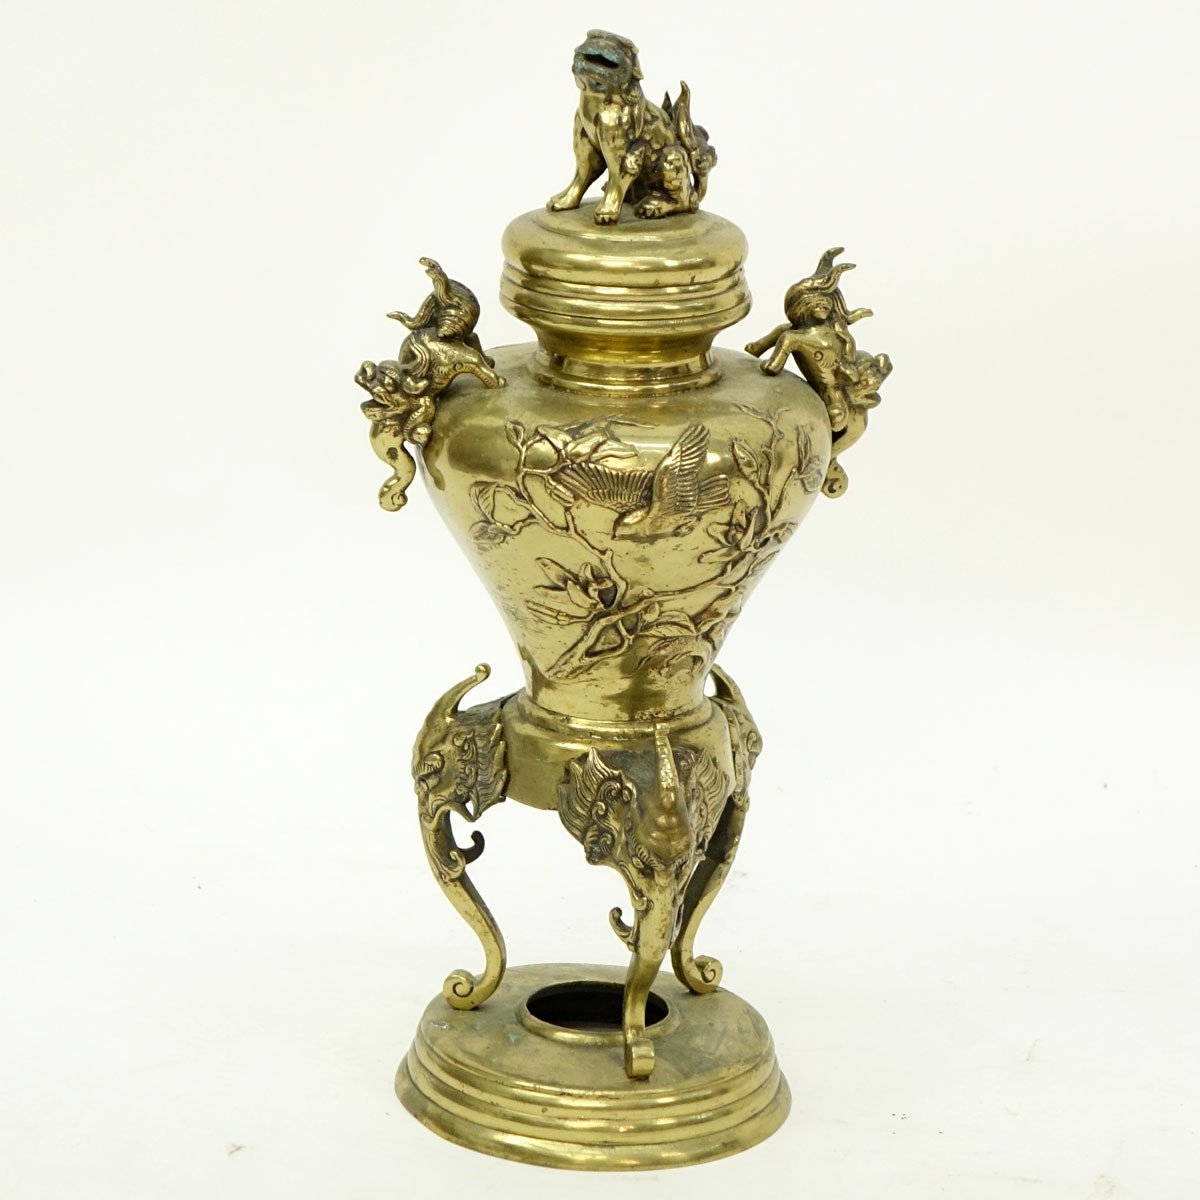 Antique Japanese Gilt Bronze High Standing Incense Burner with Foo Dog Finial. Raised birds and flowers relief, with figural handles.